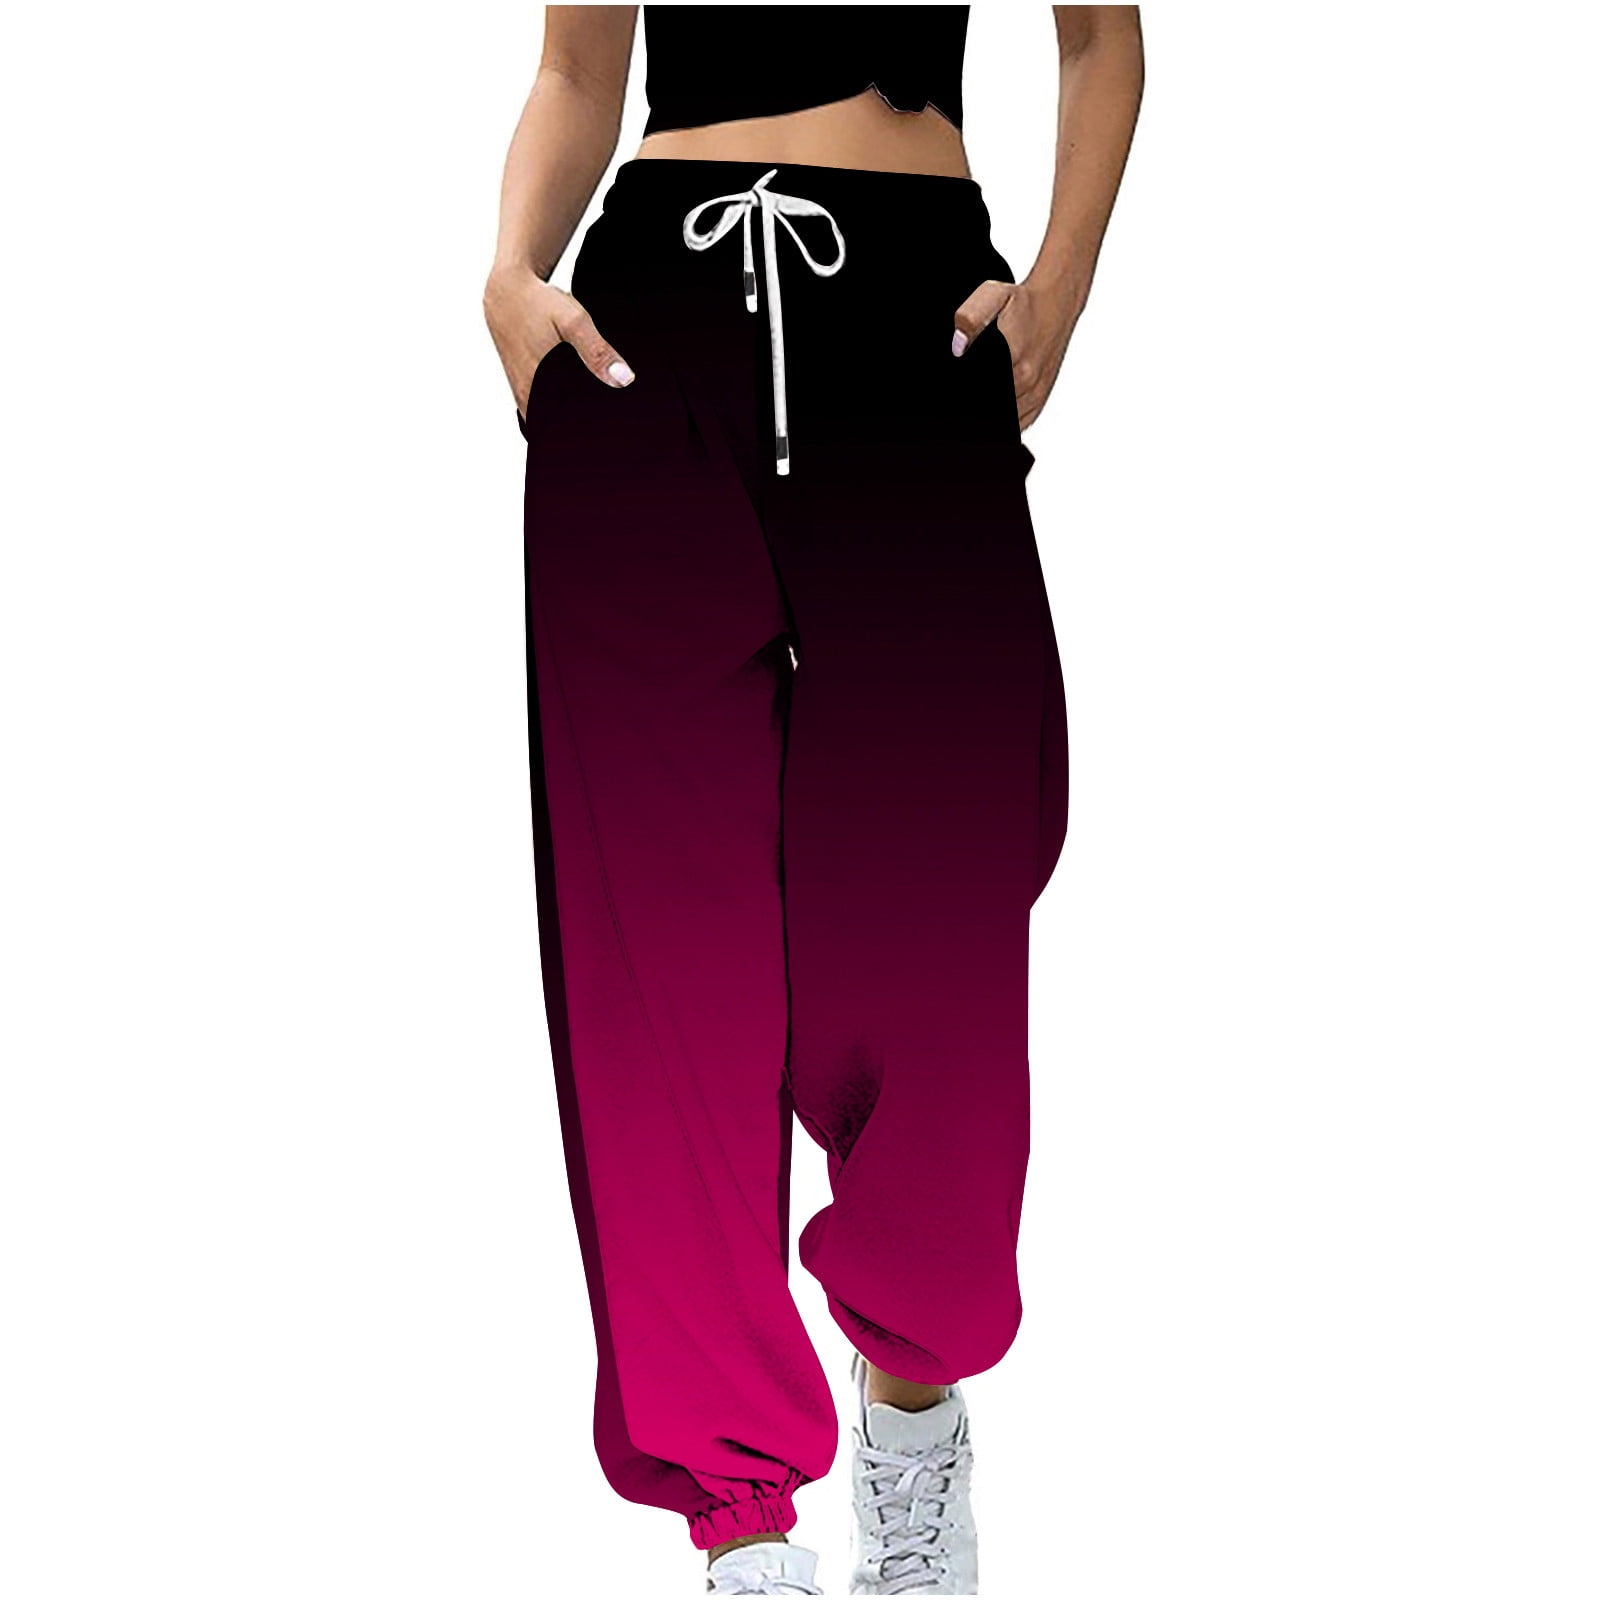 YYDGH Trousers for Women Casual Print Bottom Sweatpants with Pocket High  Waist Sporty Clothes Joggers Sweat Pants Pink Black M